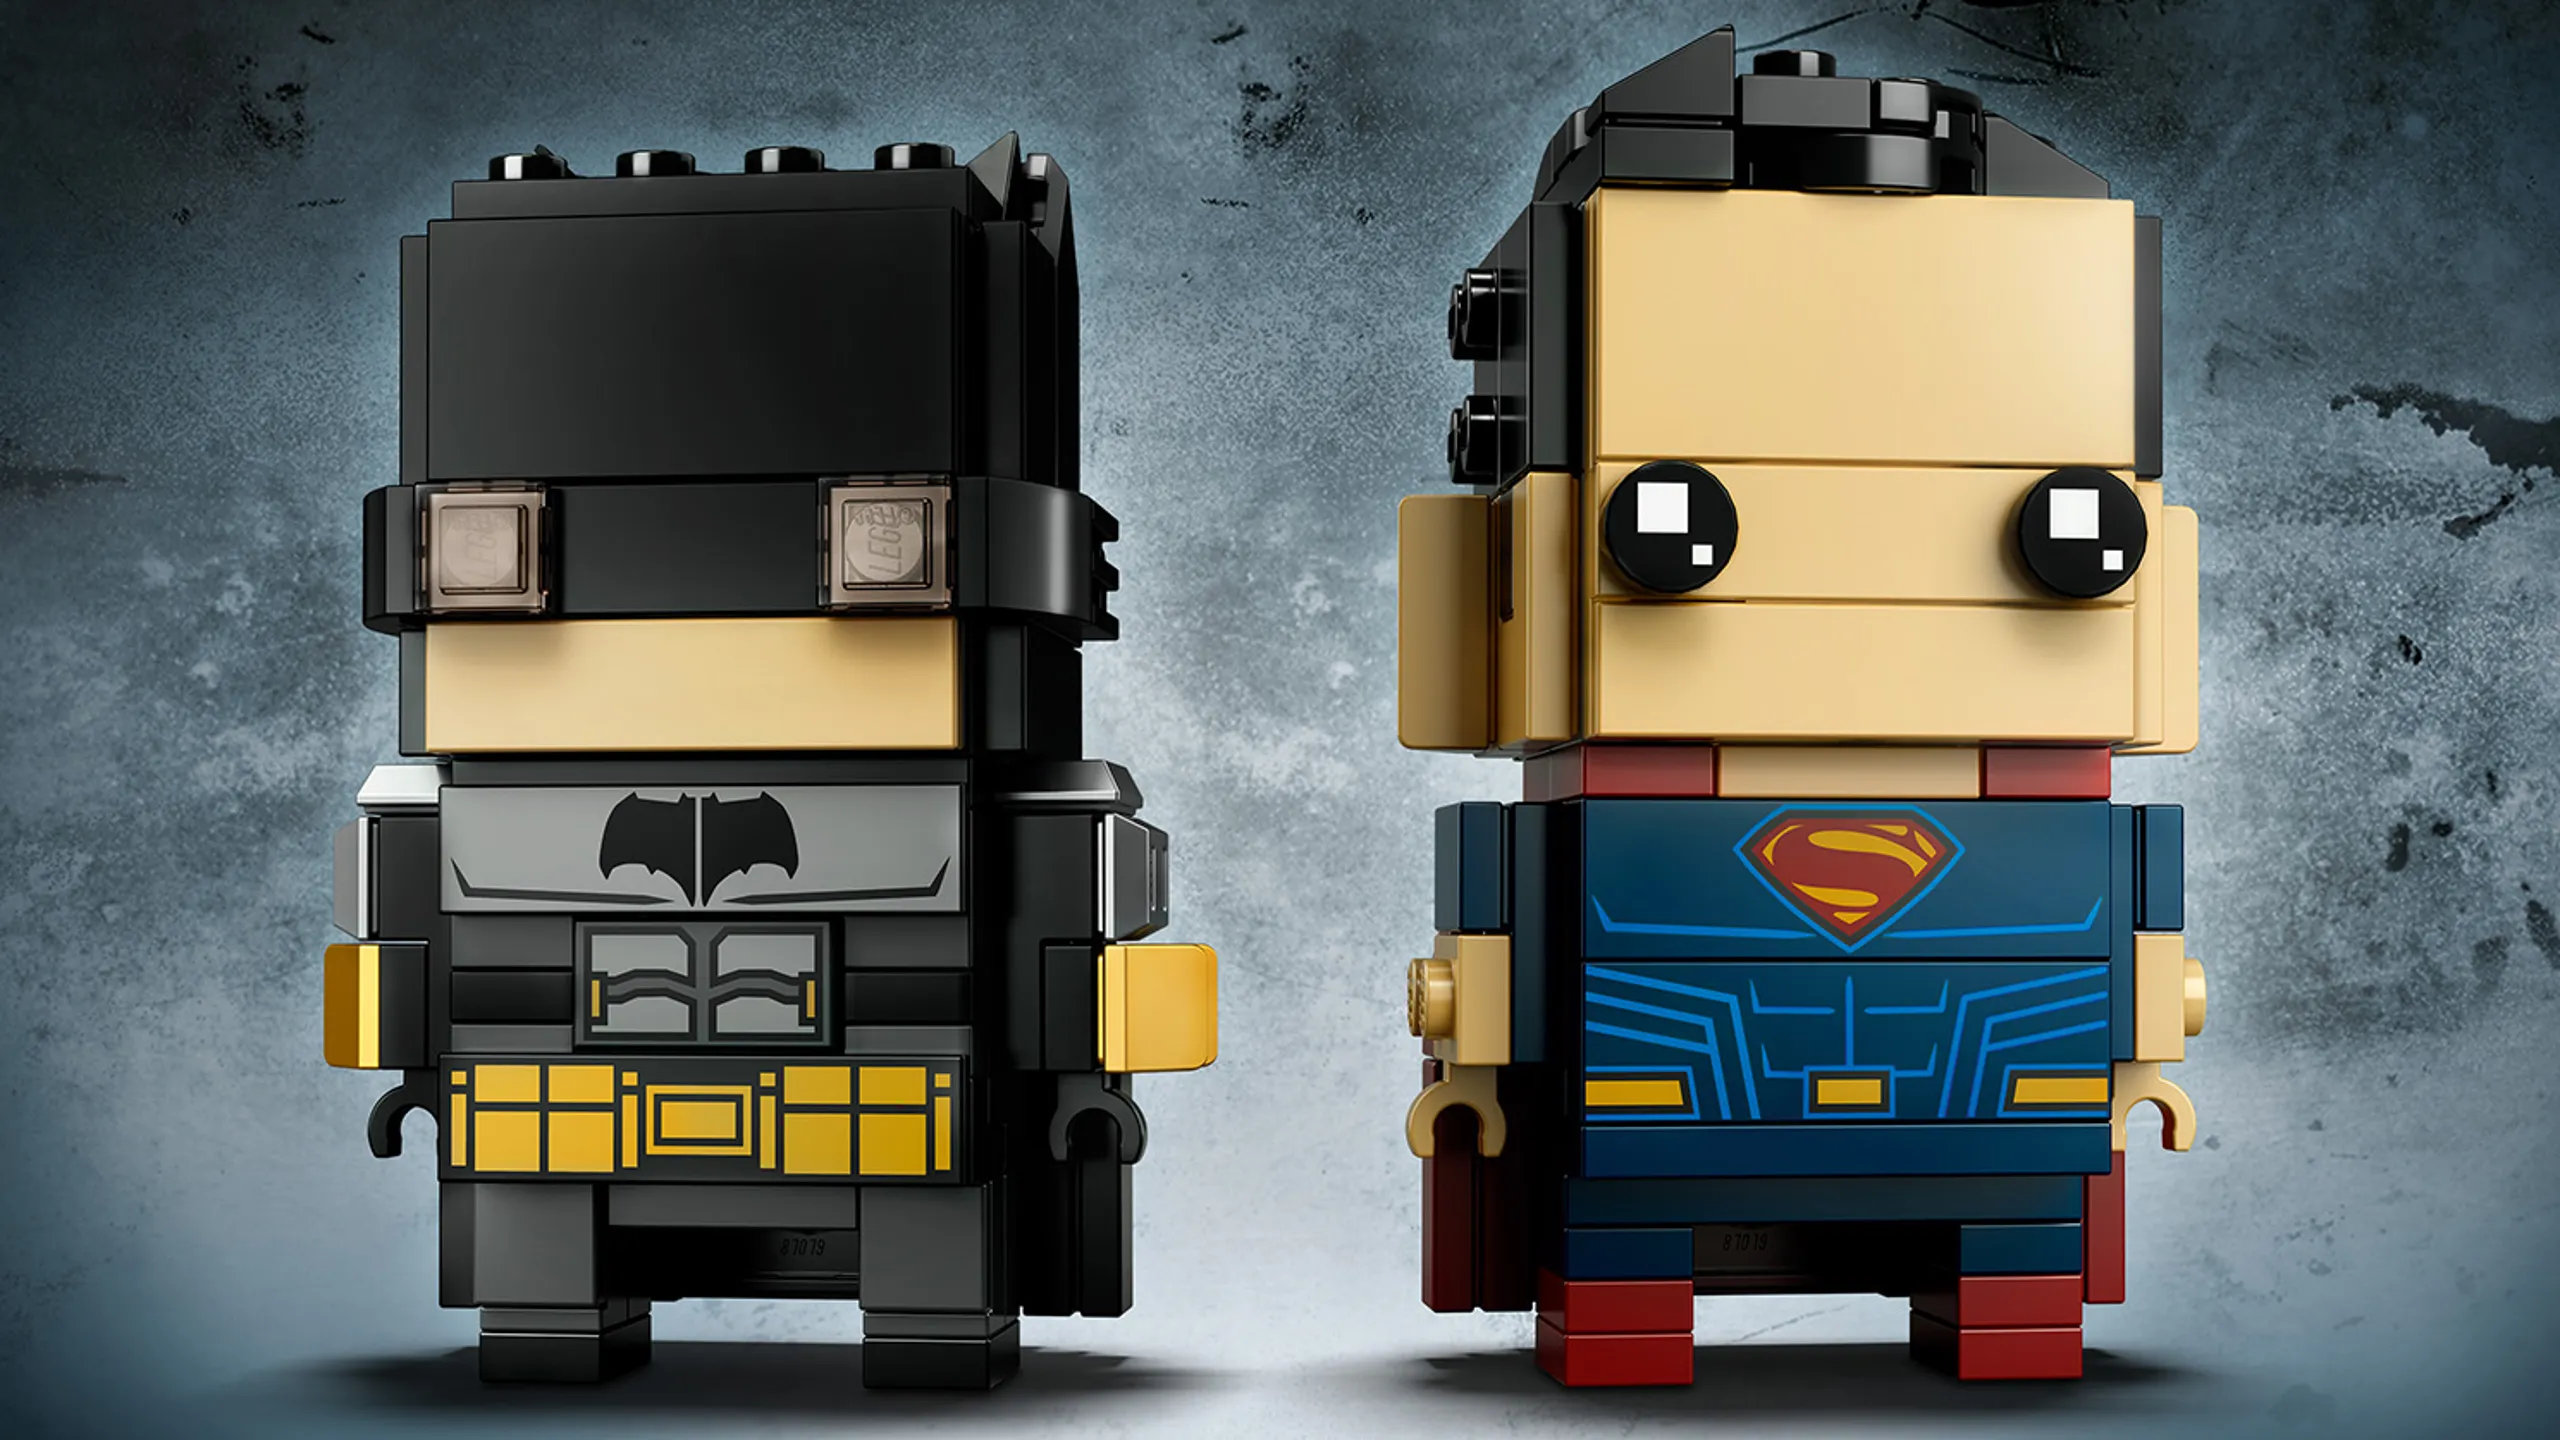 LEGO Brickheadz - 41610 Tactical Batman & Superman - Build these two characters from the Justice League movie and display them on their individual baseplates.